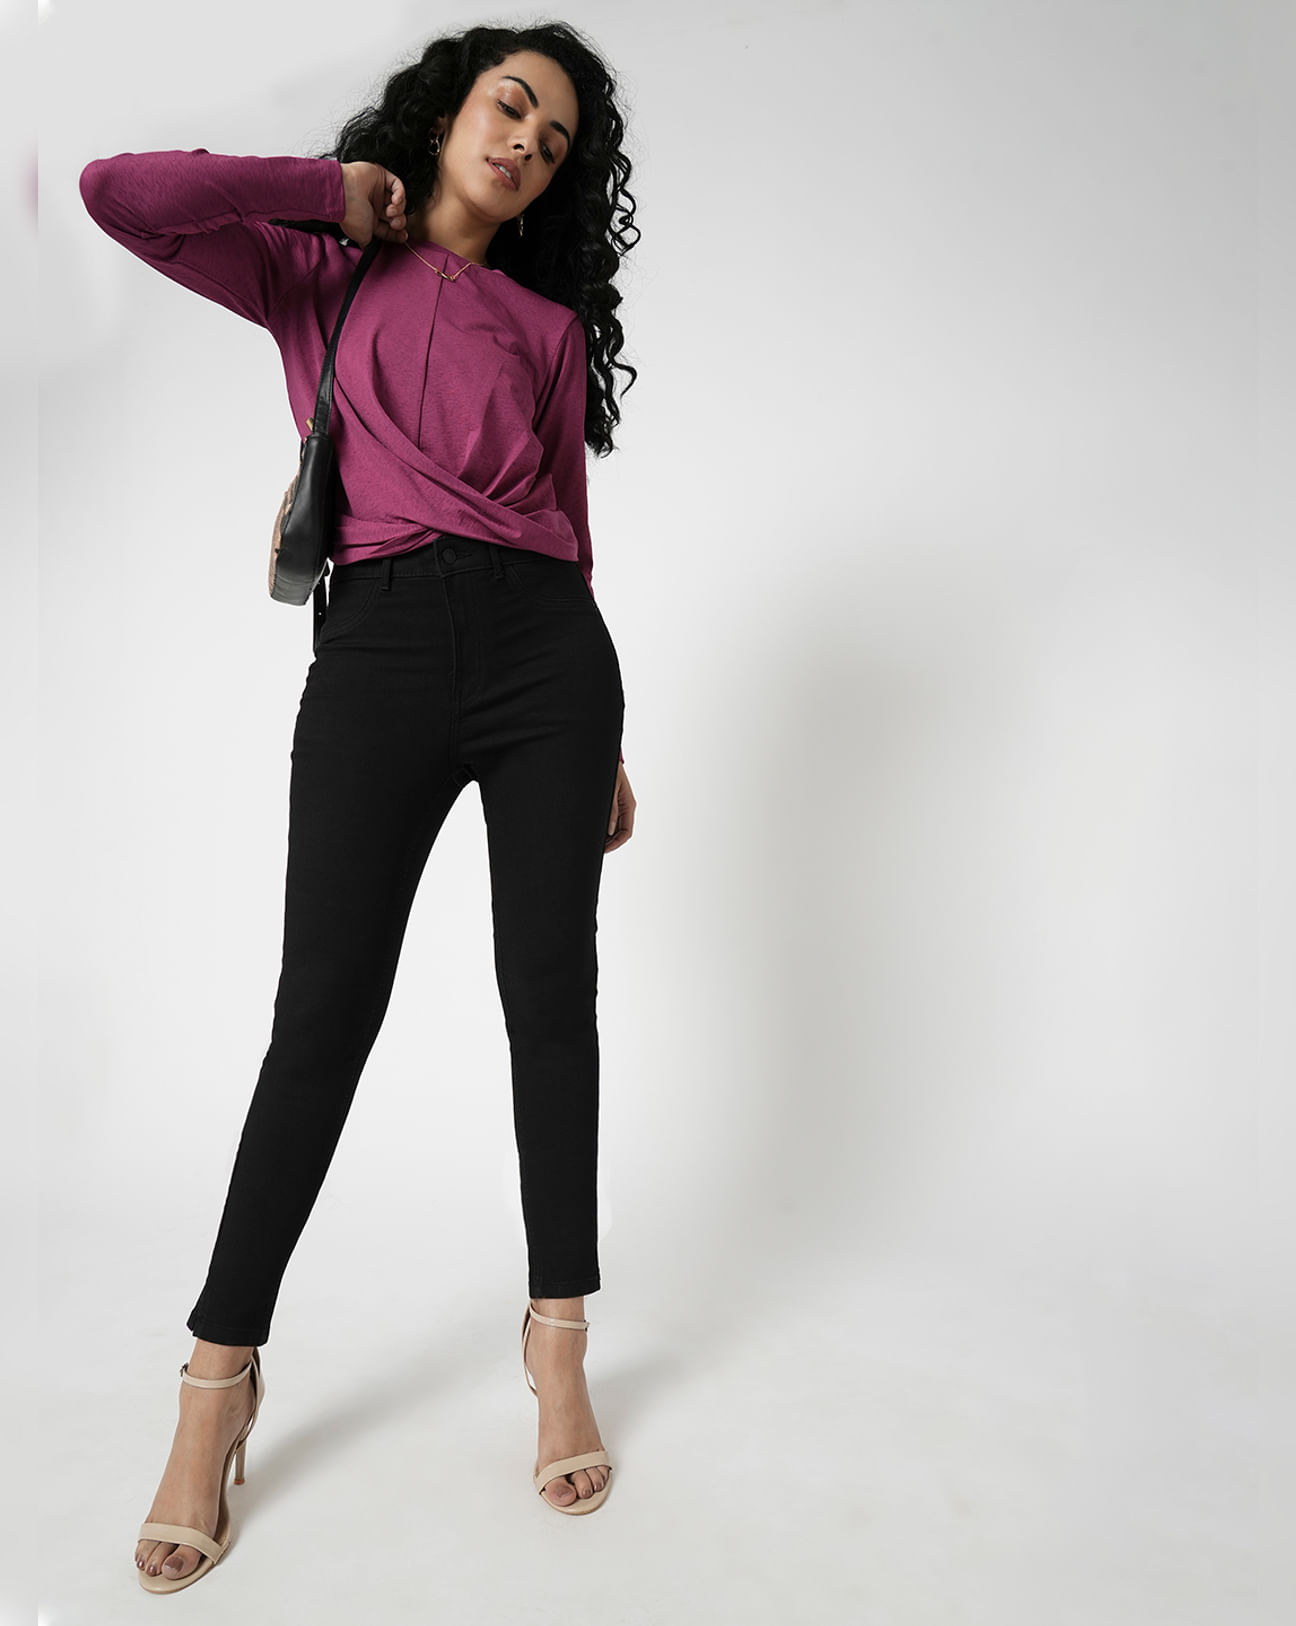 Buy SPANX® Medium Control Jean Ish Shaping Skinny Jeggings from Next India